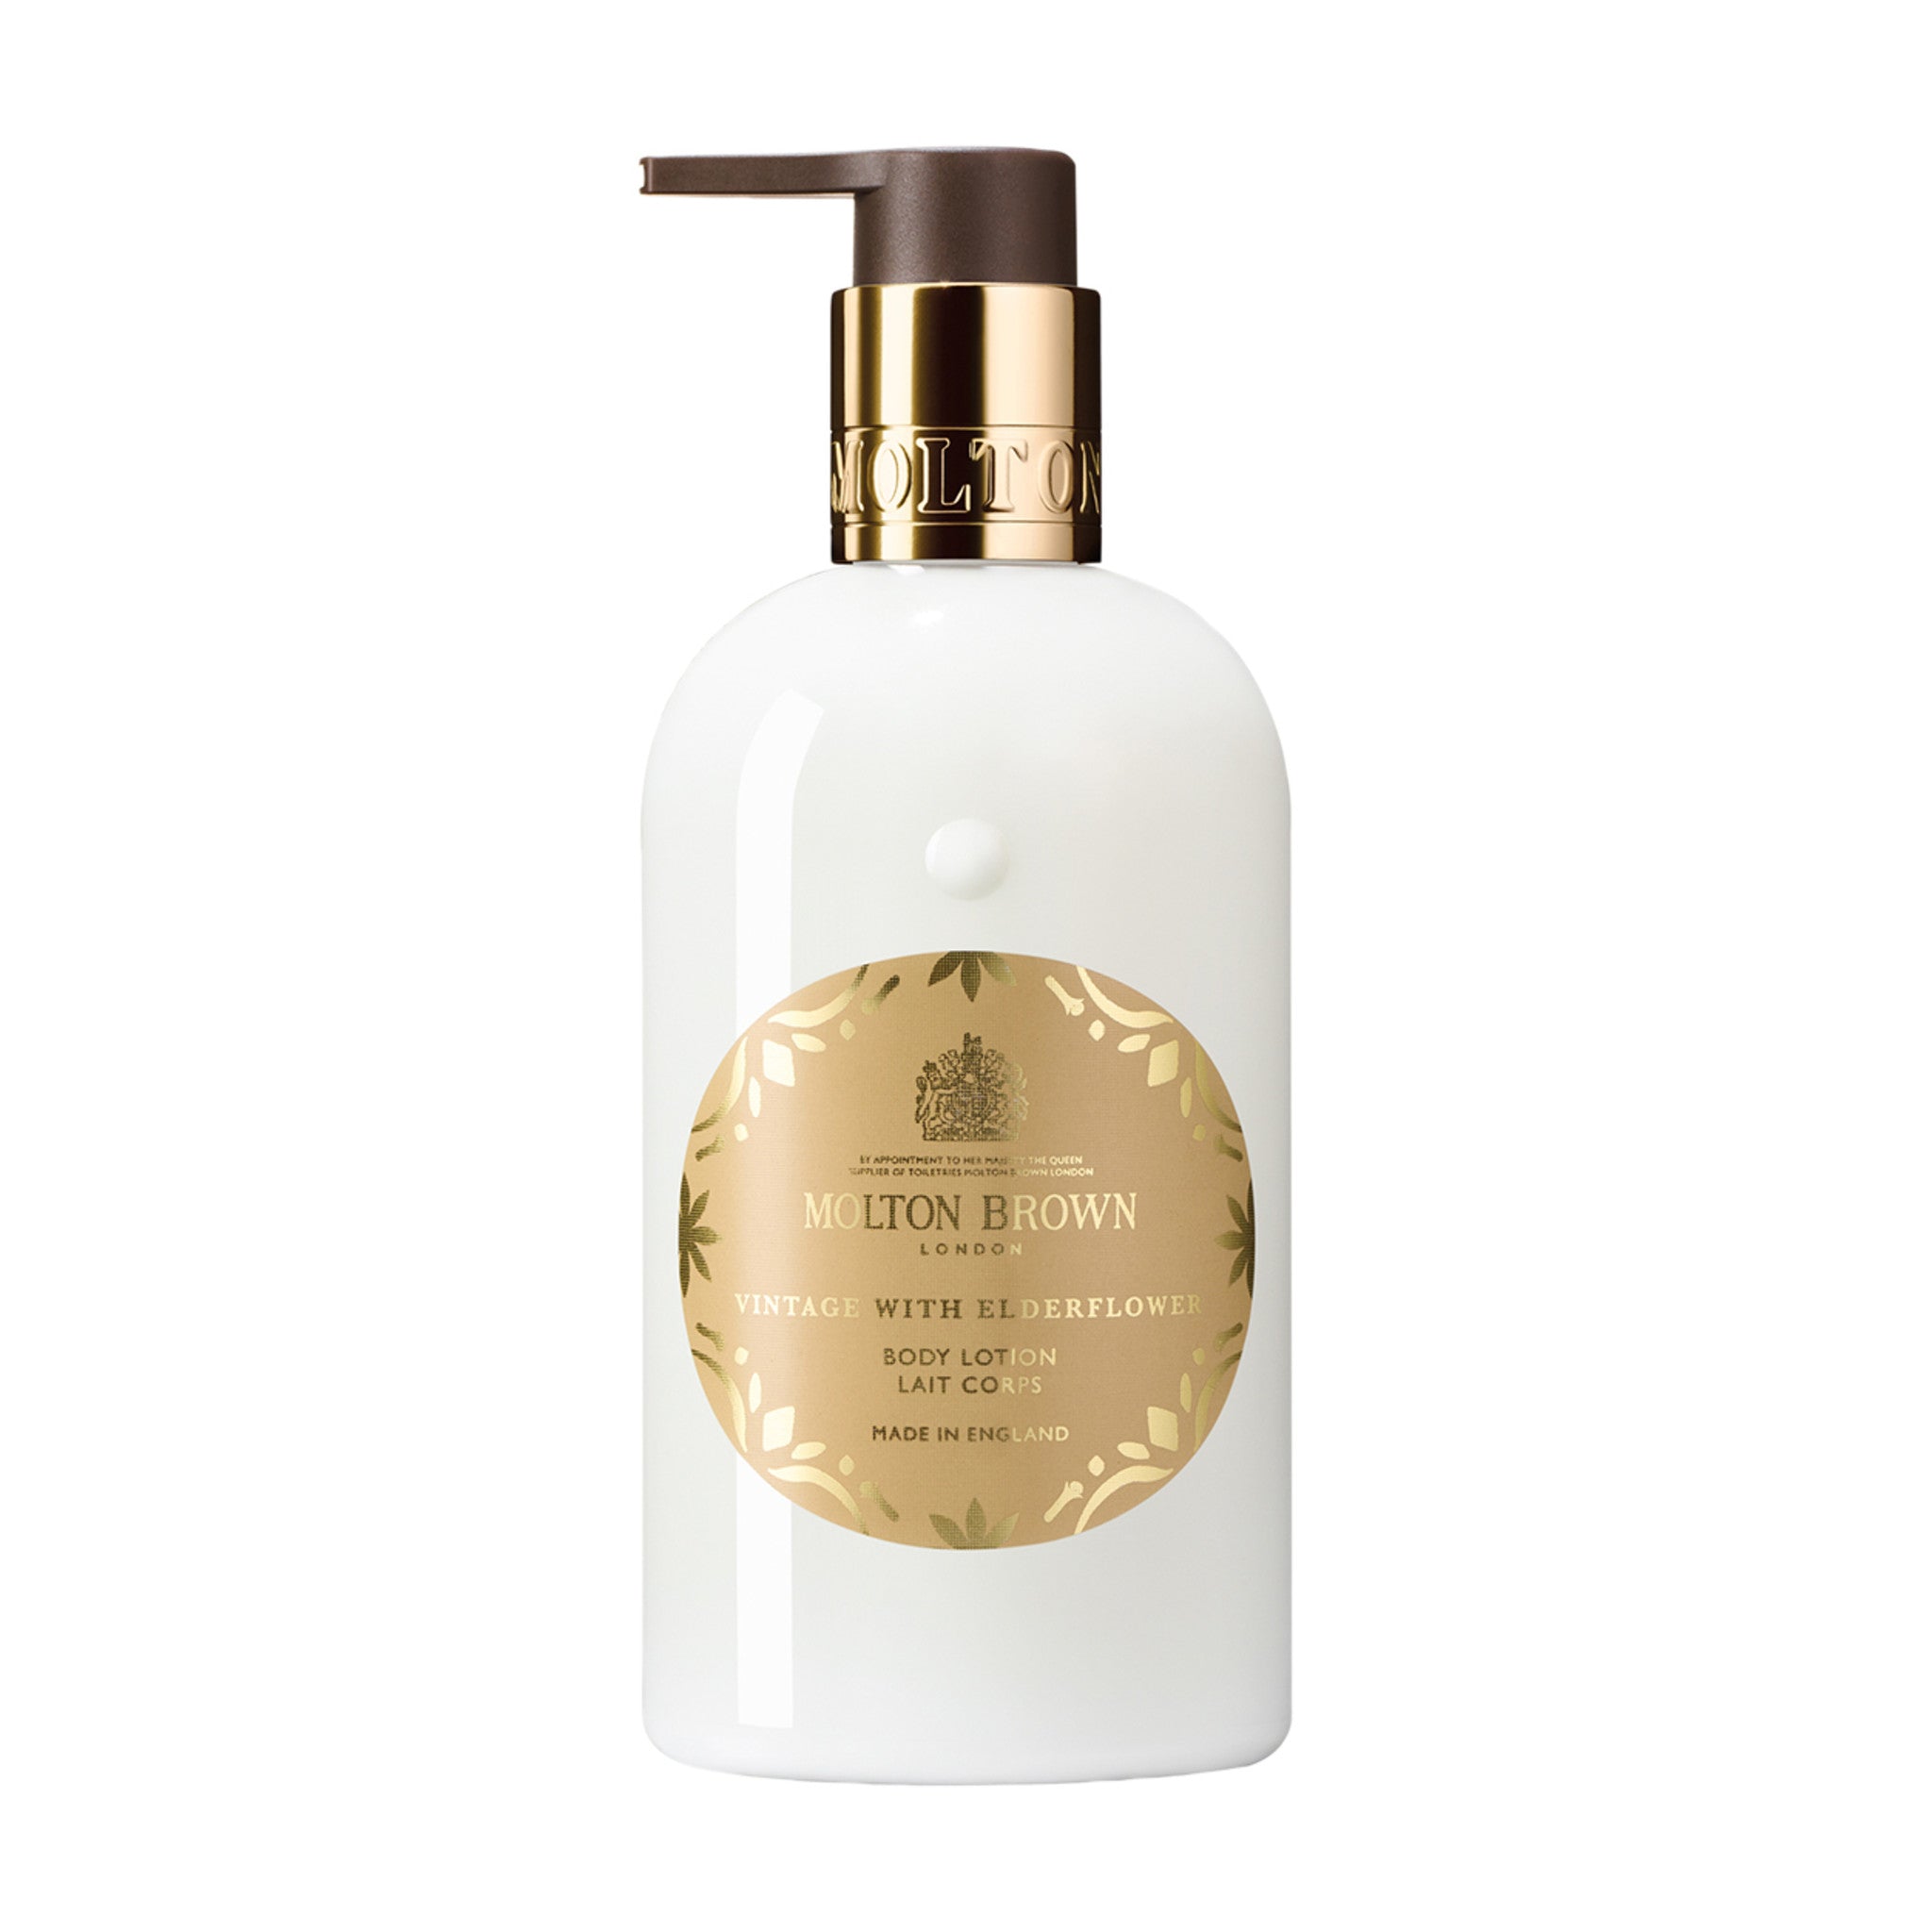 Molton Brown Vintage With Elderflower Body Lotion (Limited Edition) main image.